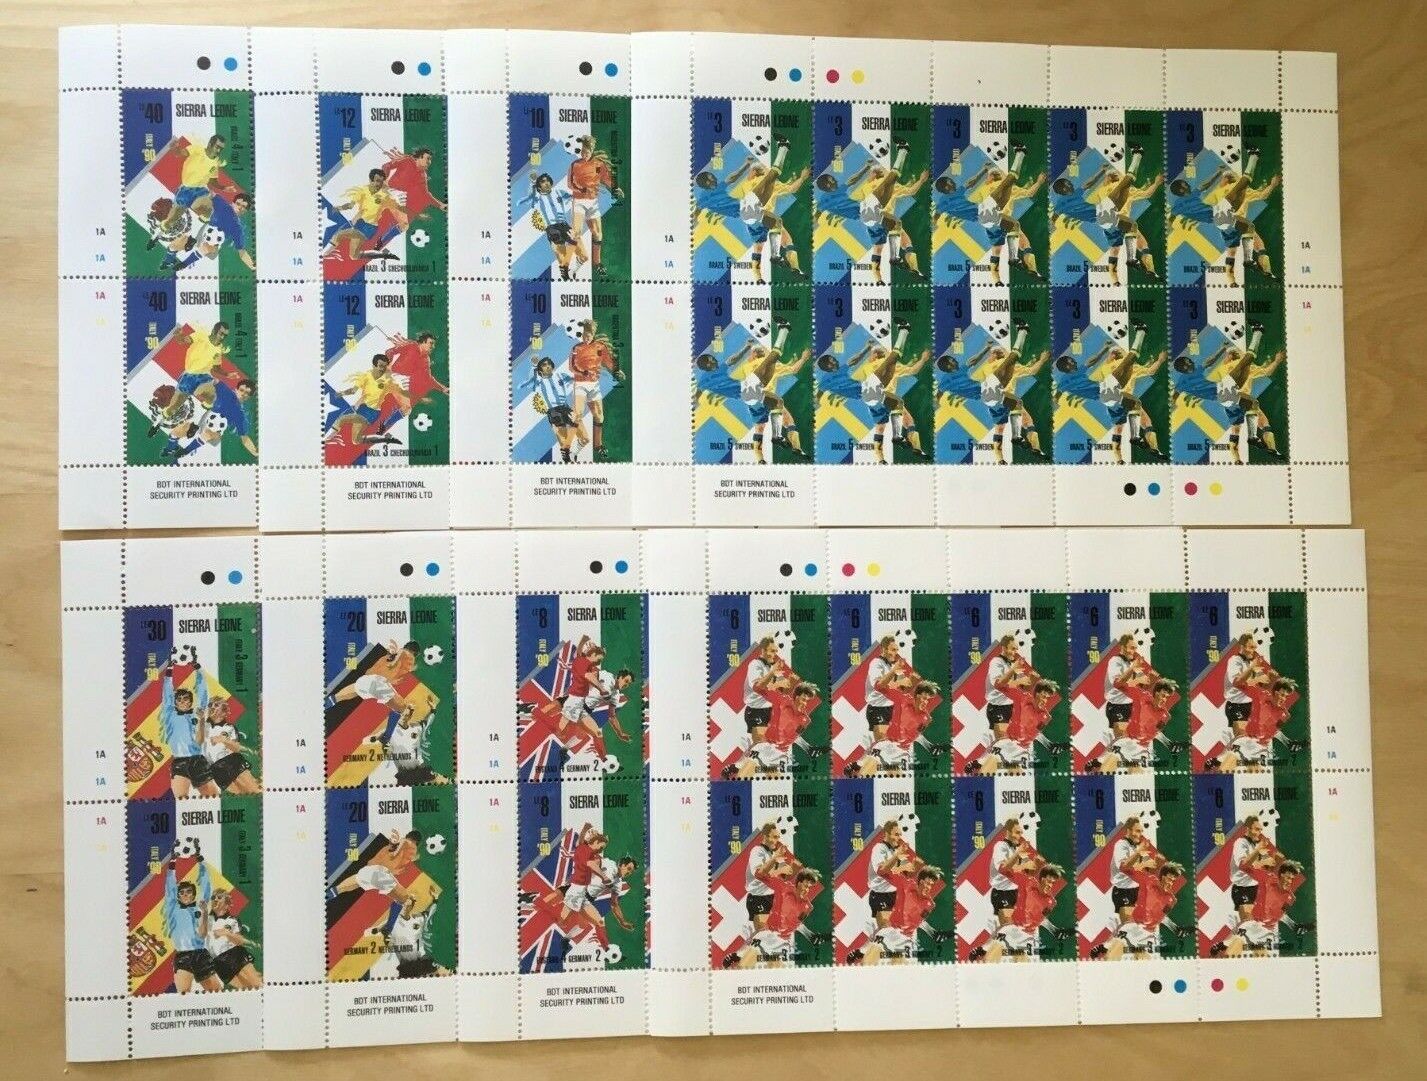 FULL SHEETS Sierra Leone 1989 1035-42 - Italy World Cup - Set of Sheets - MNH